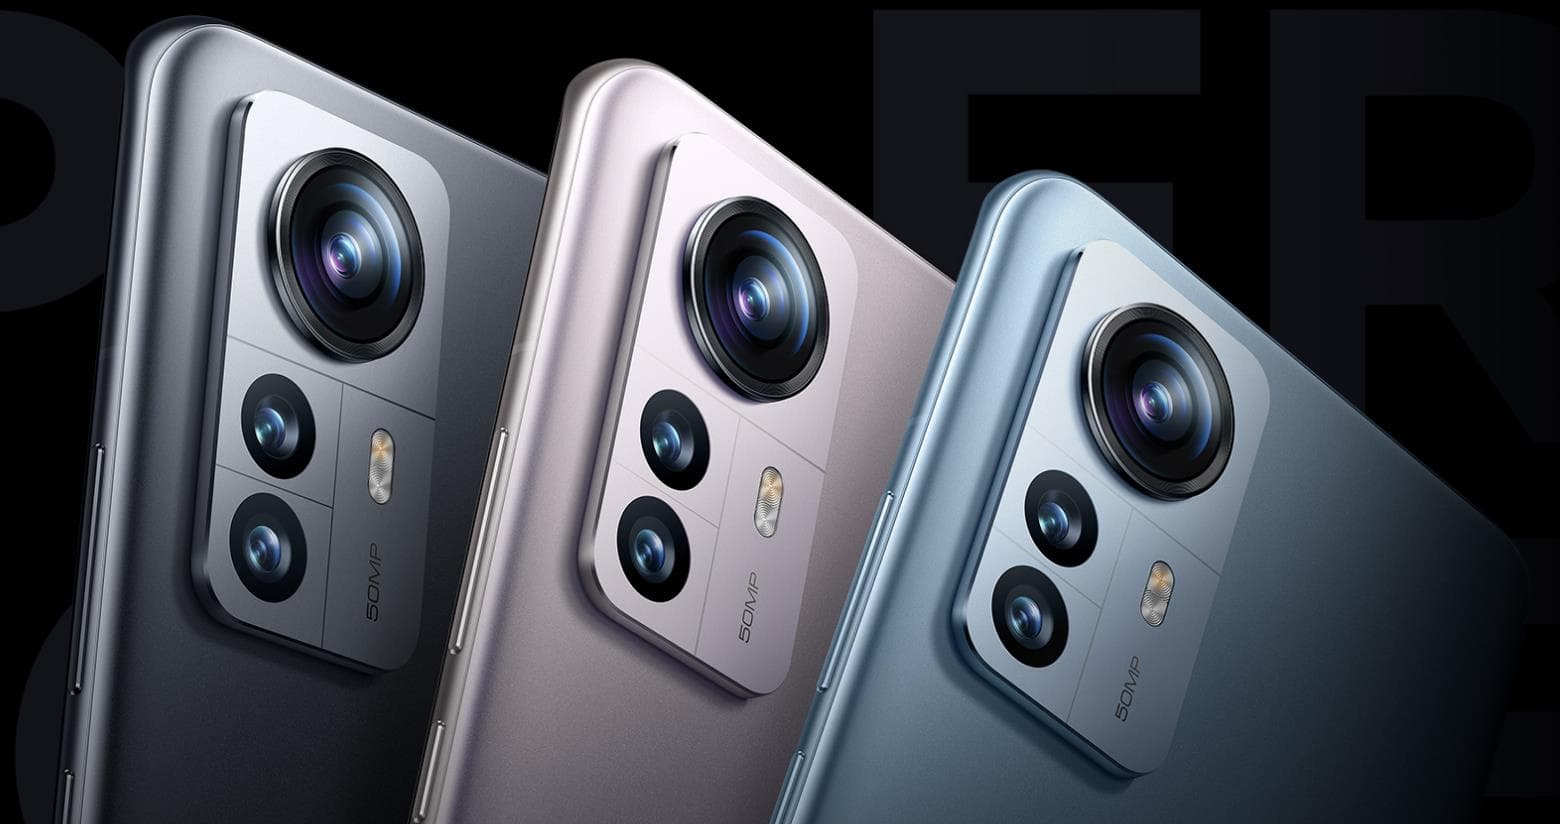 Xiaomi 12 Pro sets the standard for 2022 flagship phones with triple 50MP cameras & 120W charging – When is the UK launch?